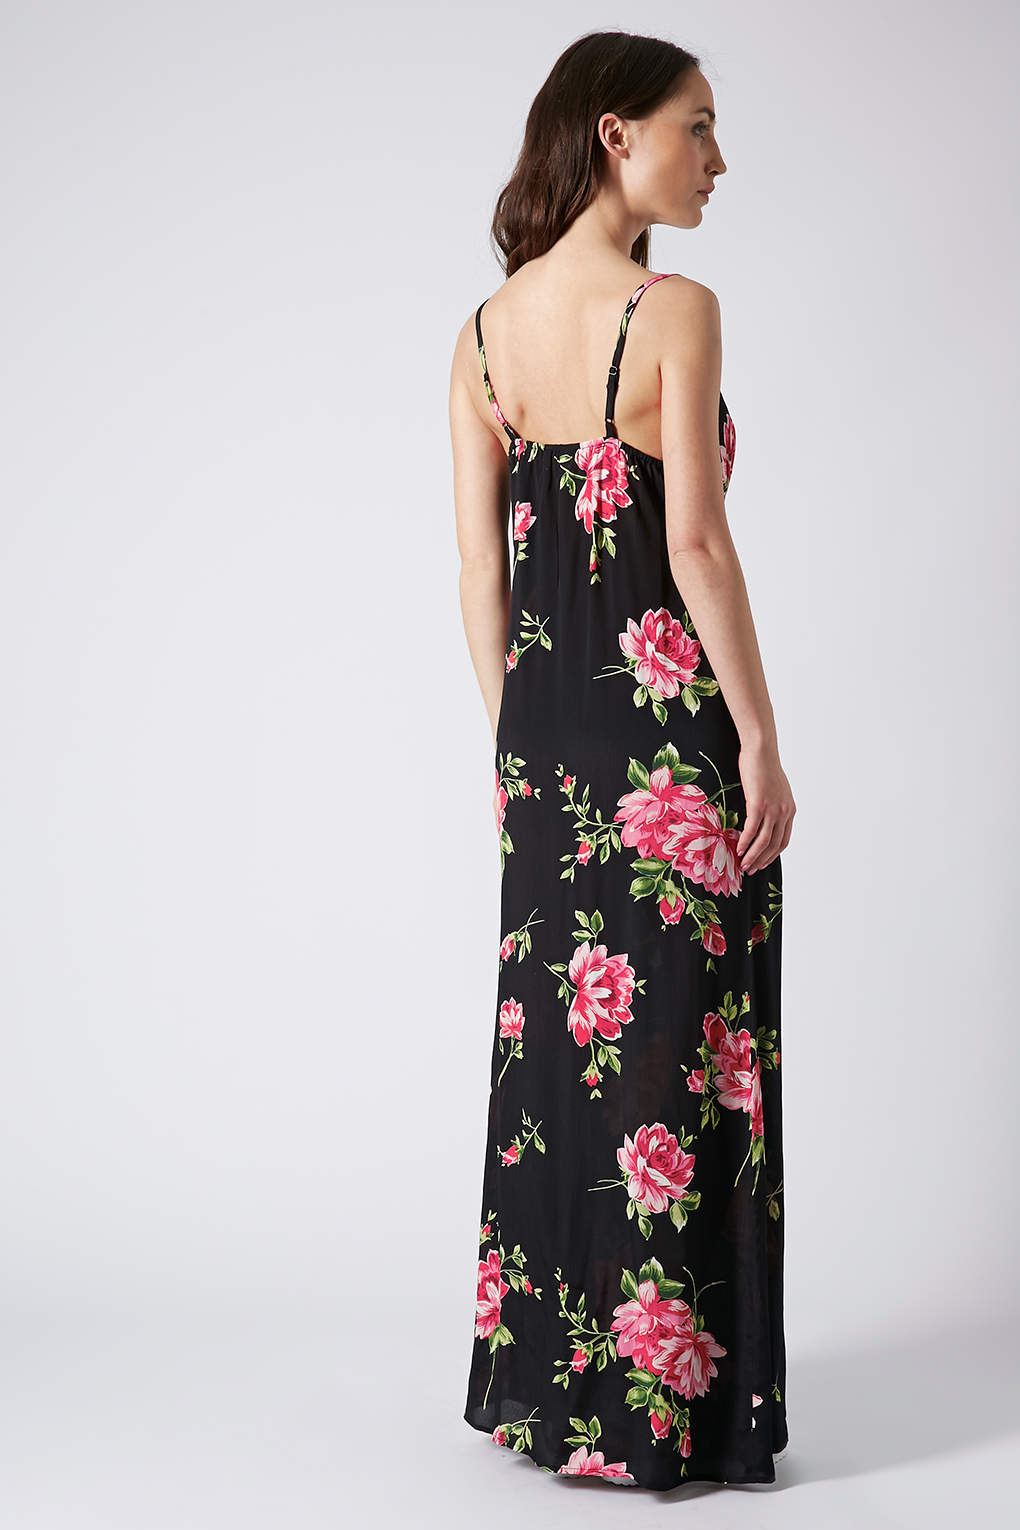 Lyst - Topshop Maxi Dress By Band Of Gypsies in Pink